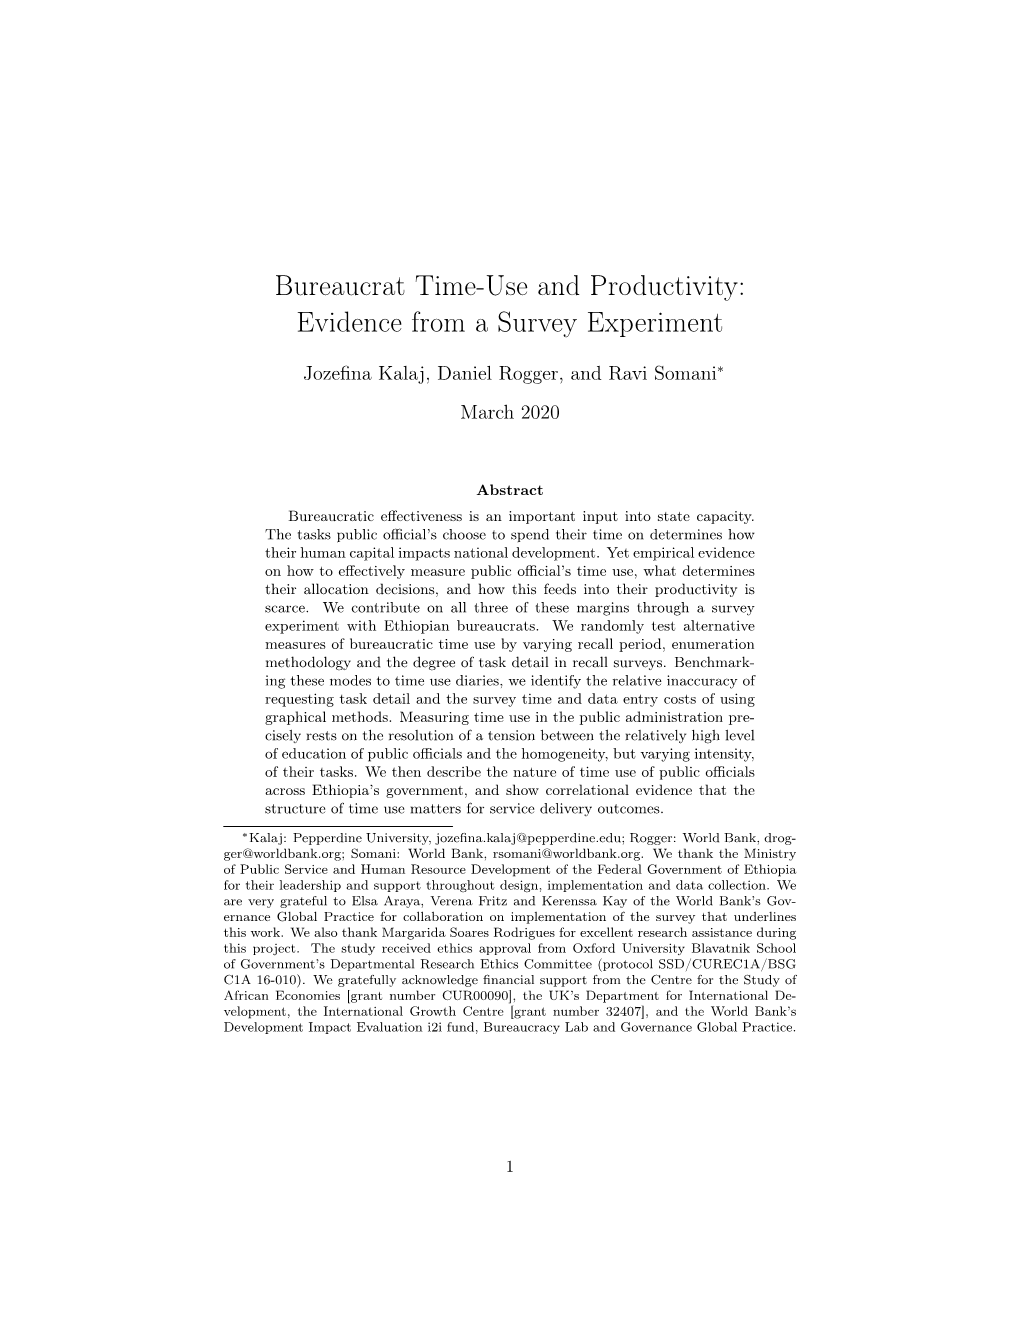 Bureaucrat Time-Use and Productivity: Evidence from a Survey Experiment